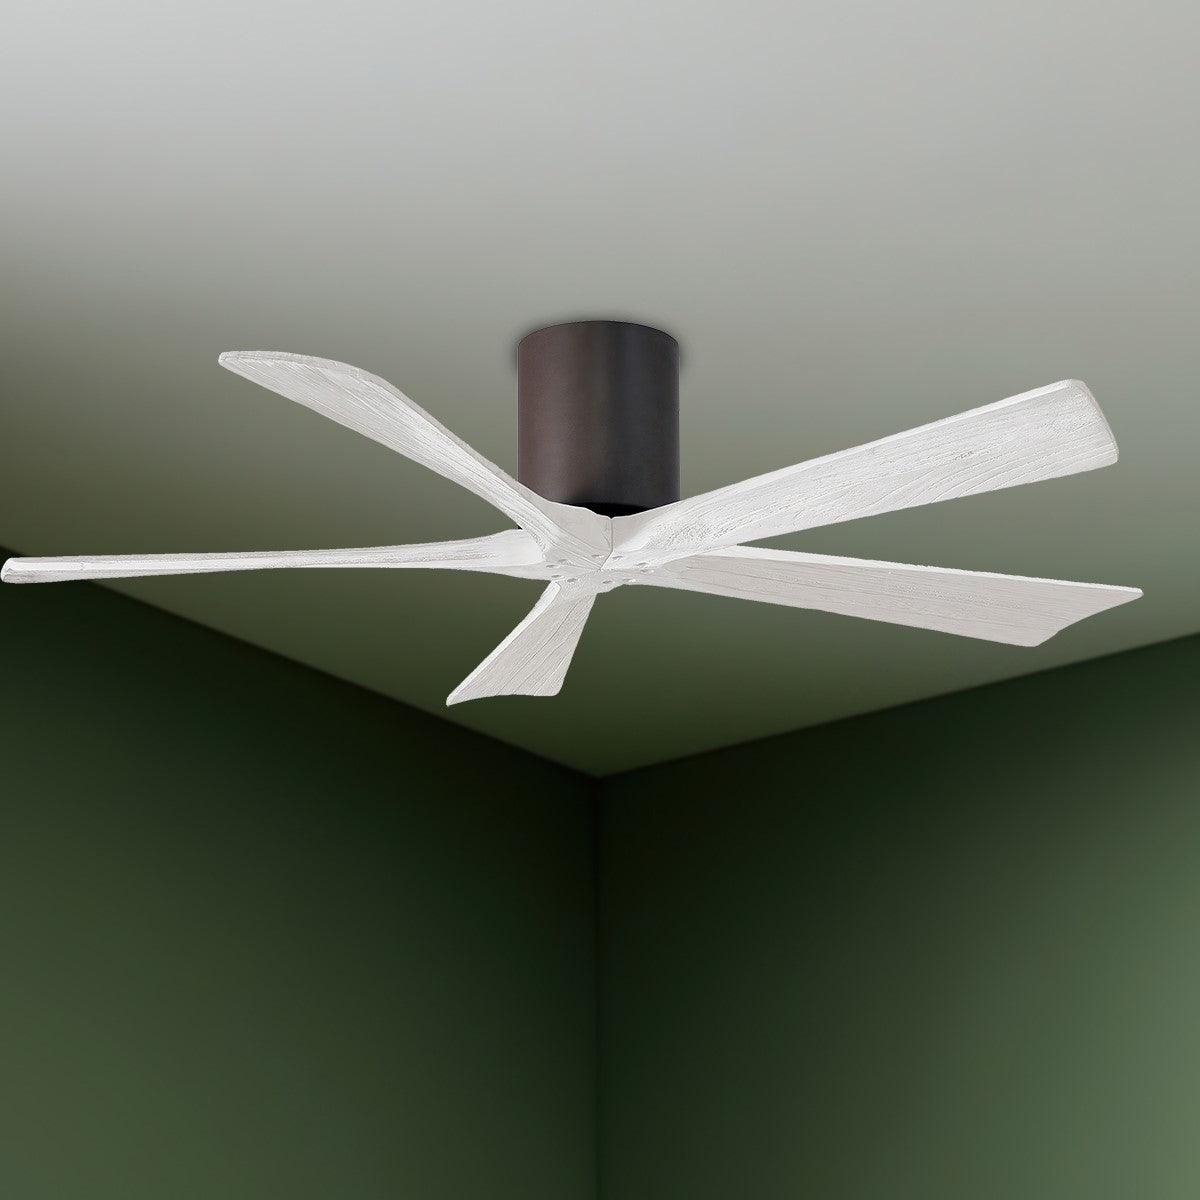 Irene 52 Inch 5 Blades Outdoor Low Profile Ceiling Fan With Remote And Wall Control